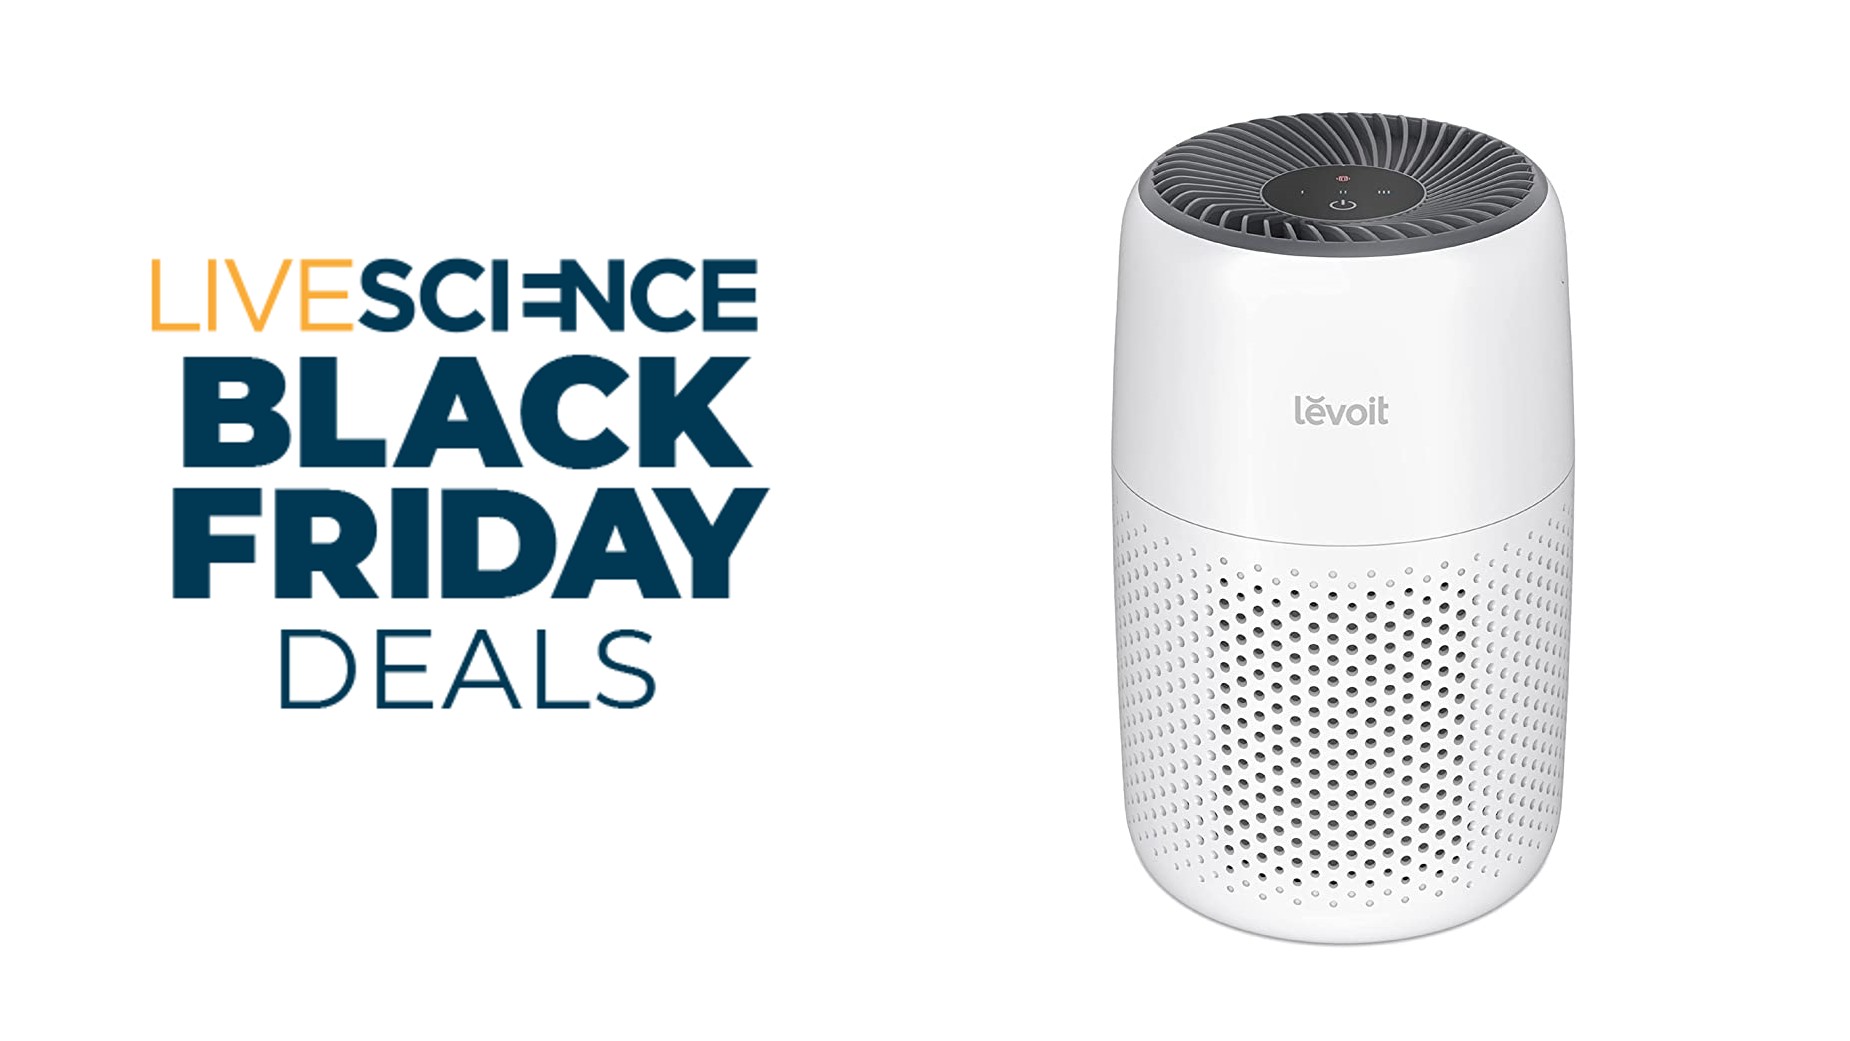 Get clean air for under $45 with this Levoit Black Friday air purifier deal